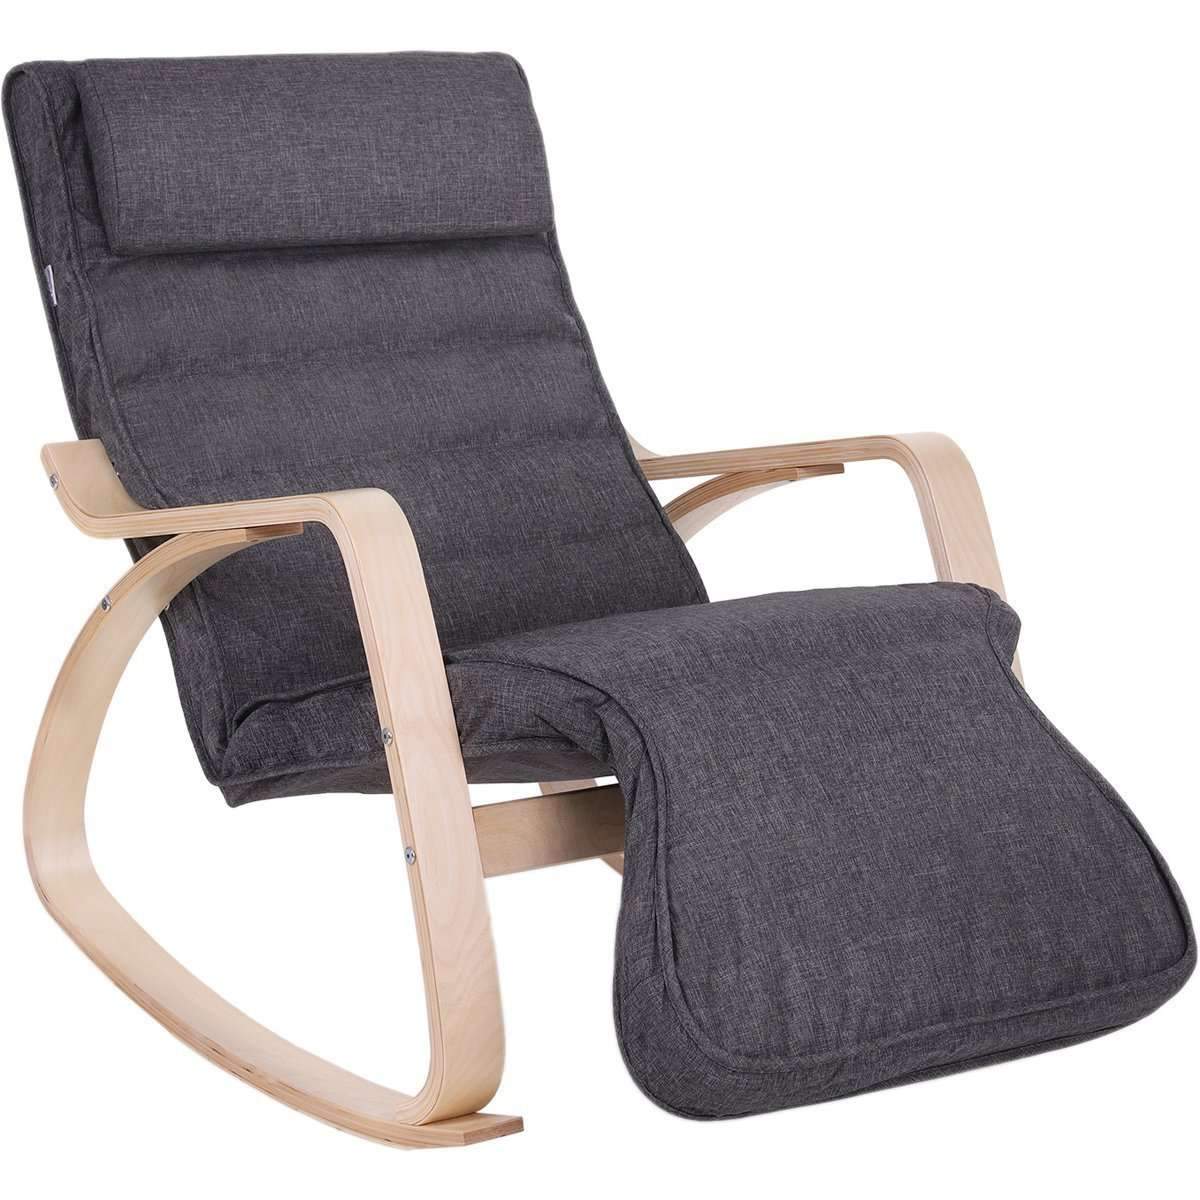 Nancy's Rocking Chair - Chaise relaxante - Chaise relax